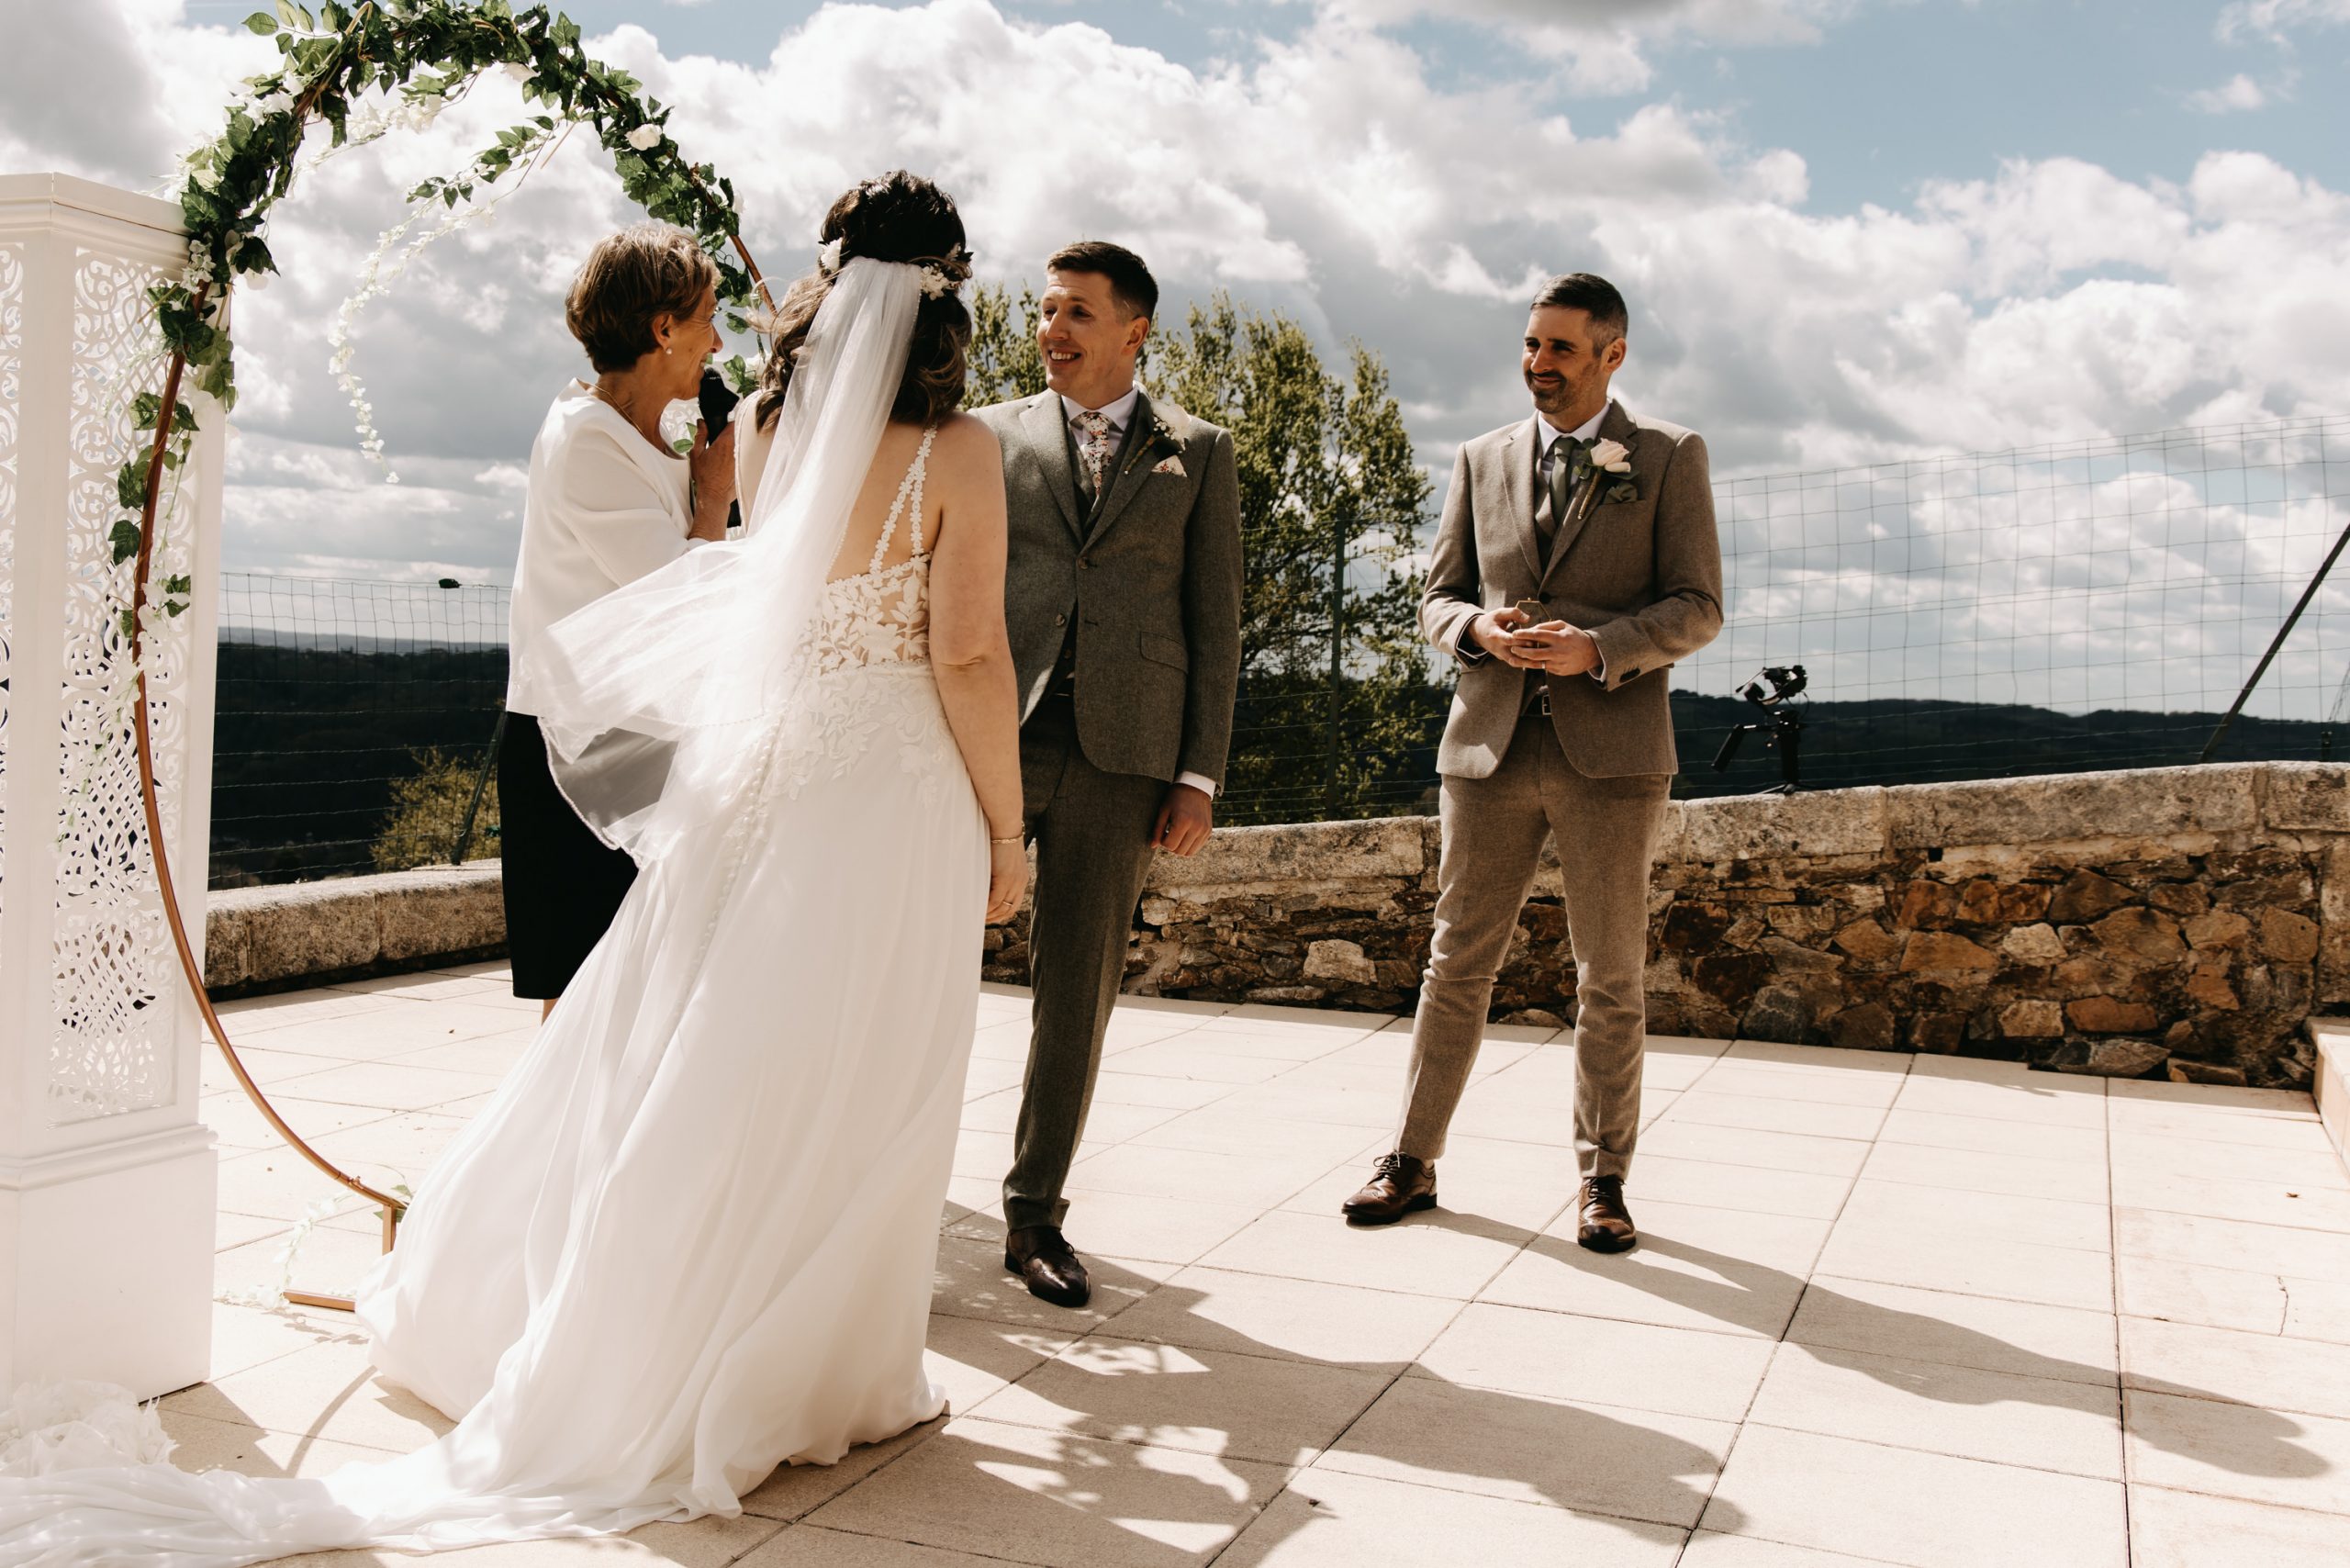 Bride in white dress and veil has her back to the camera, celebrant in white jacket and blue dress speaks to groom who wears a tweed suit